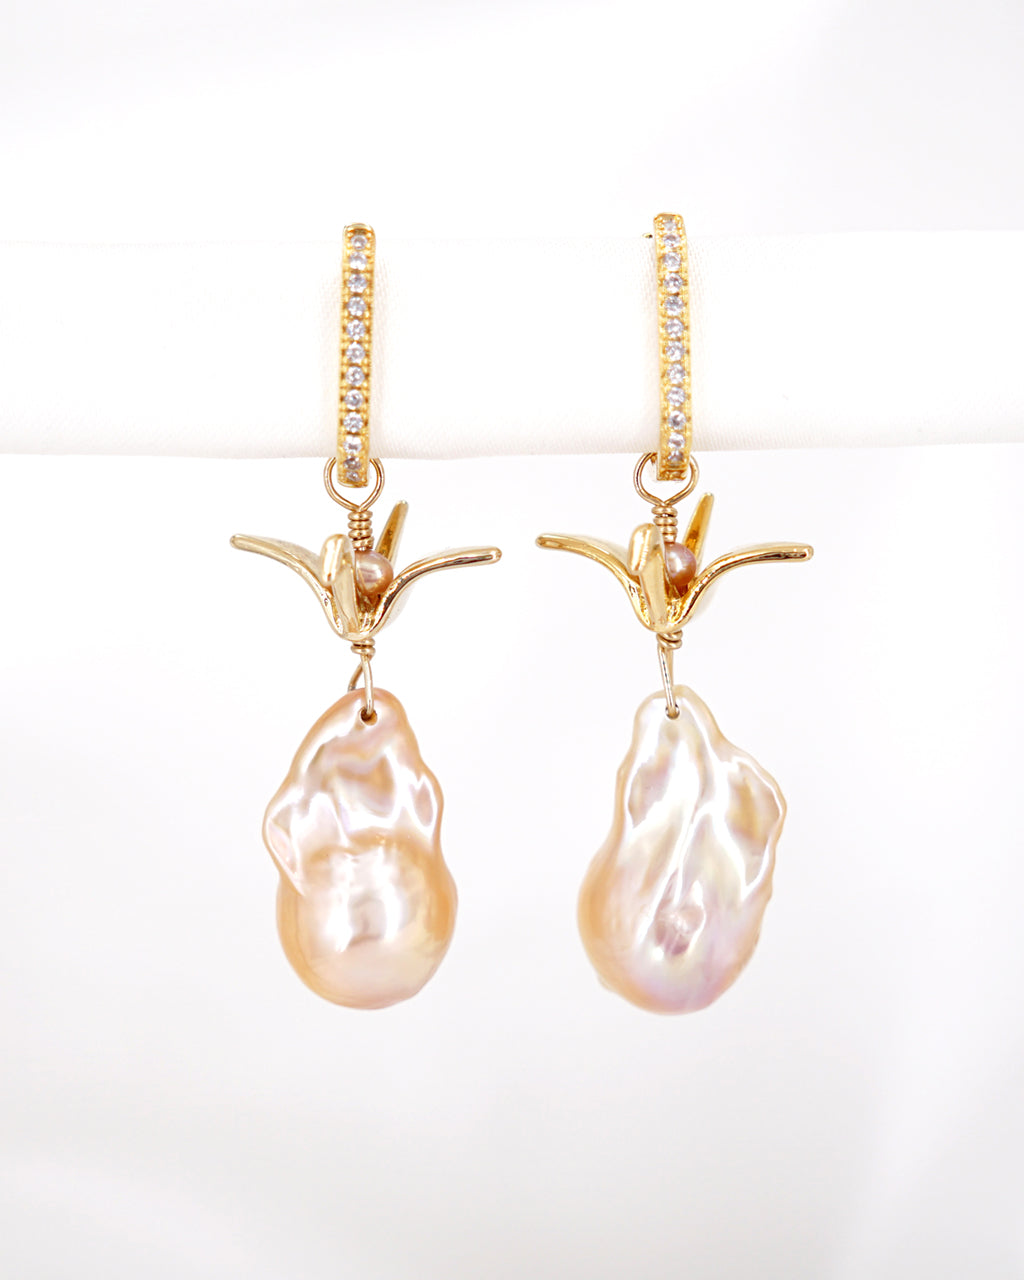 Origami Crane Baroque Pearl Earrings - Gold - Wedding Bridal Jewelry for Brides and Bridesmaids | Singapore